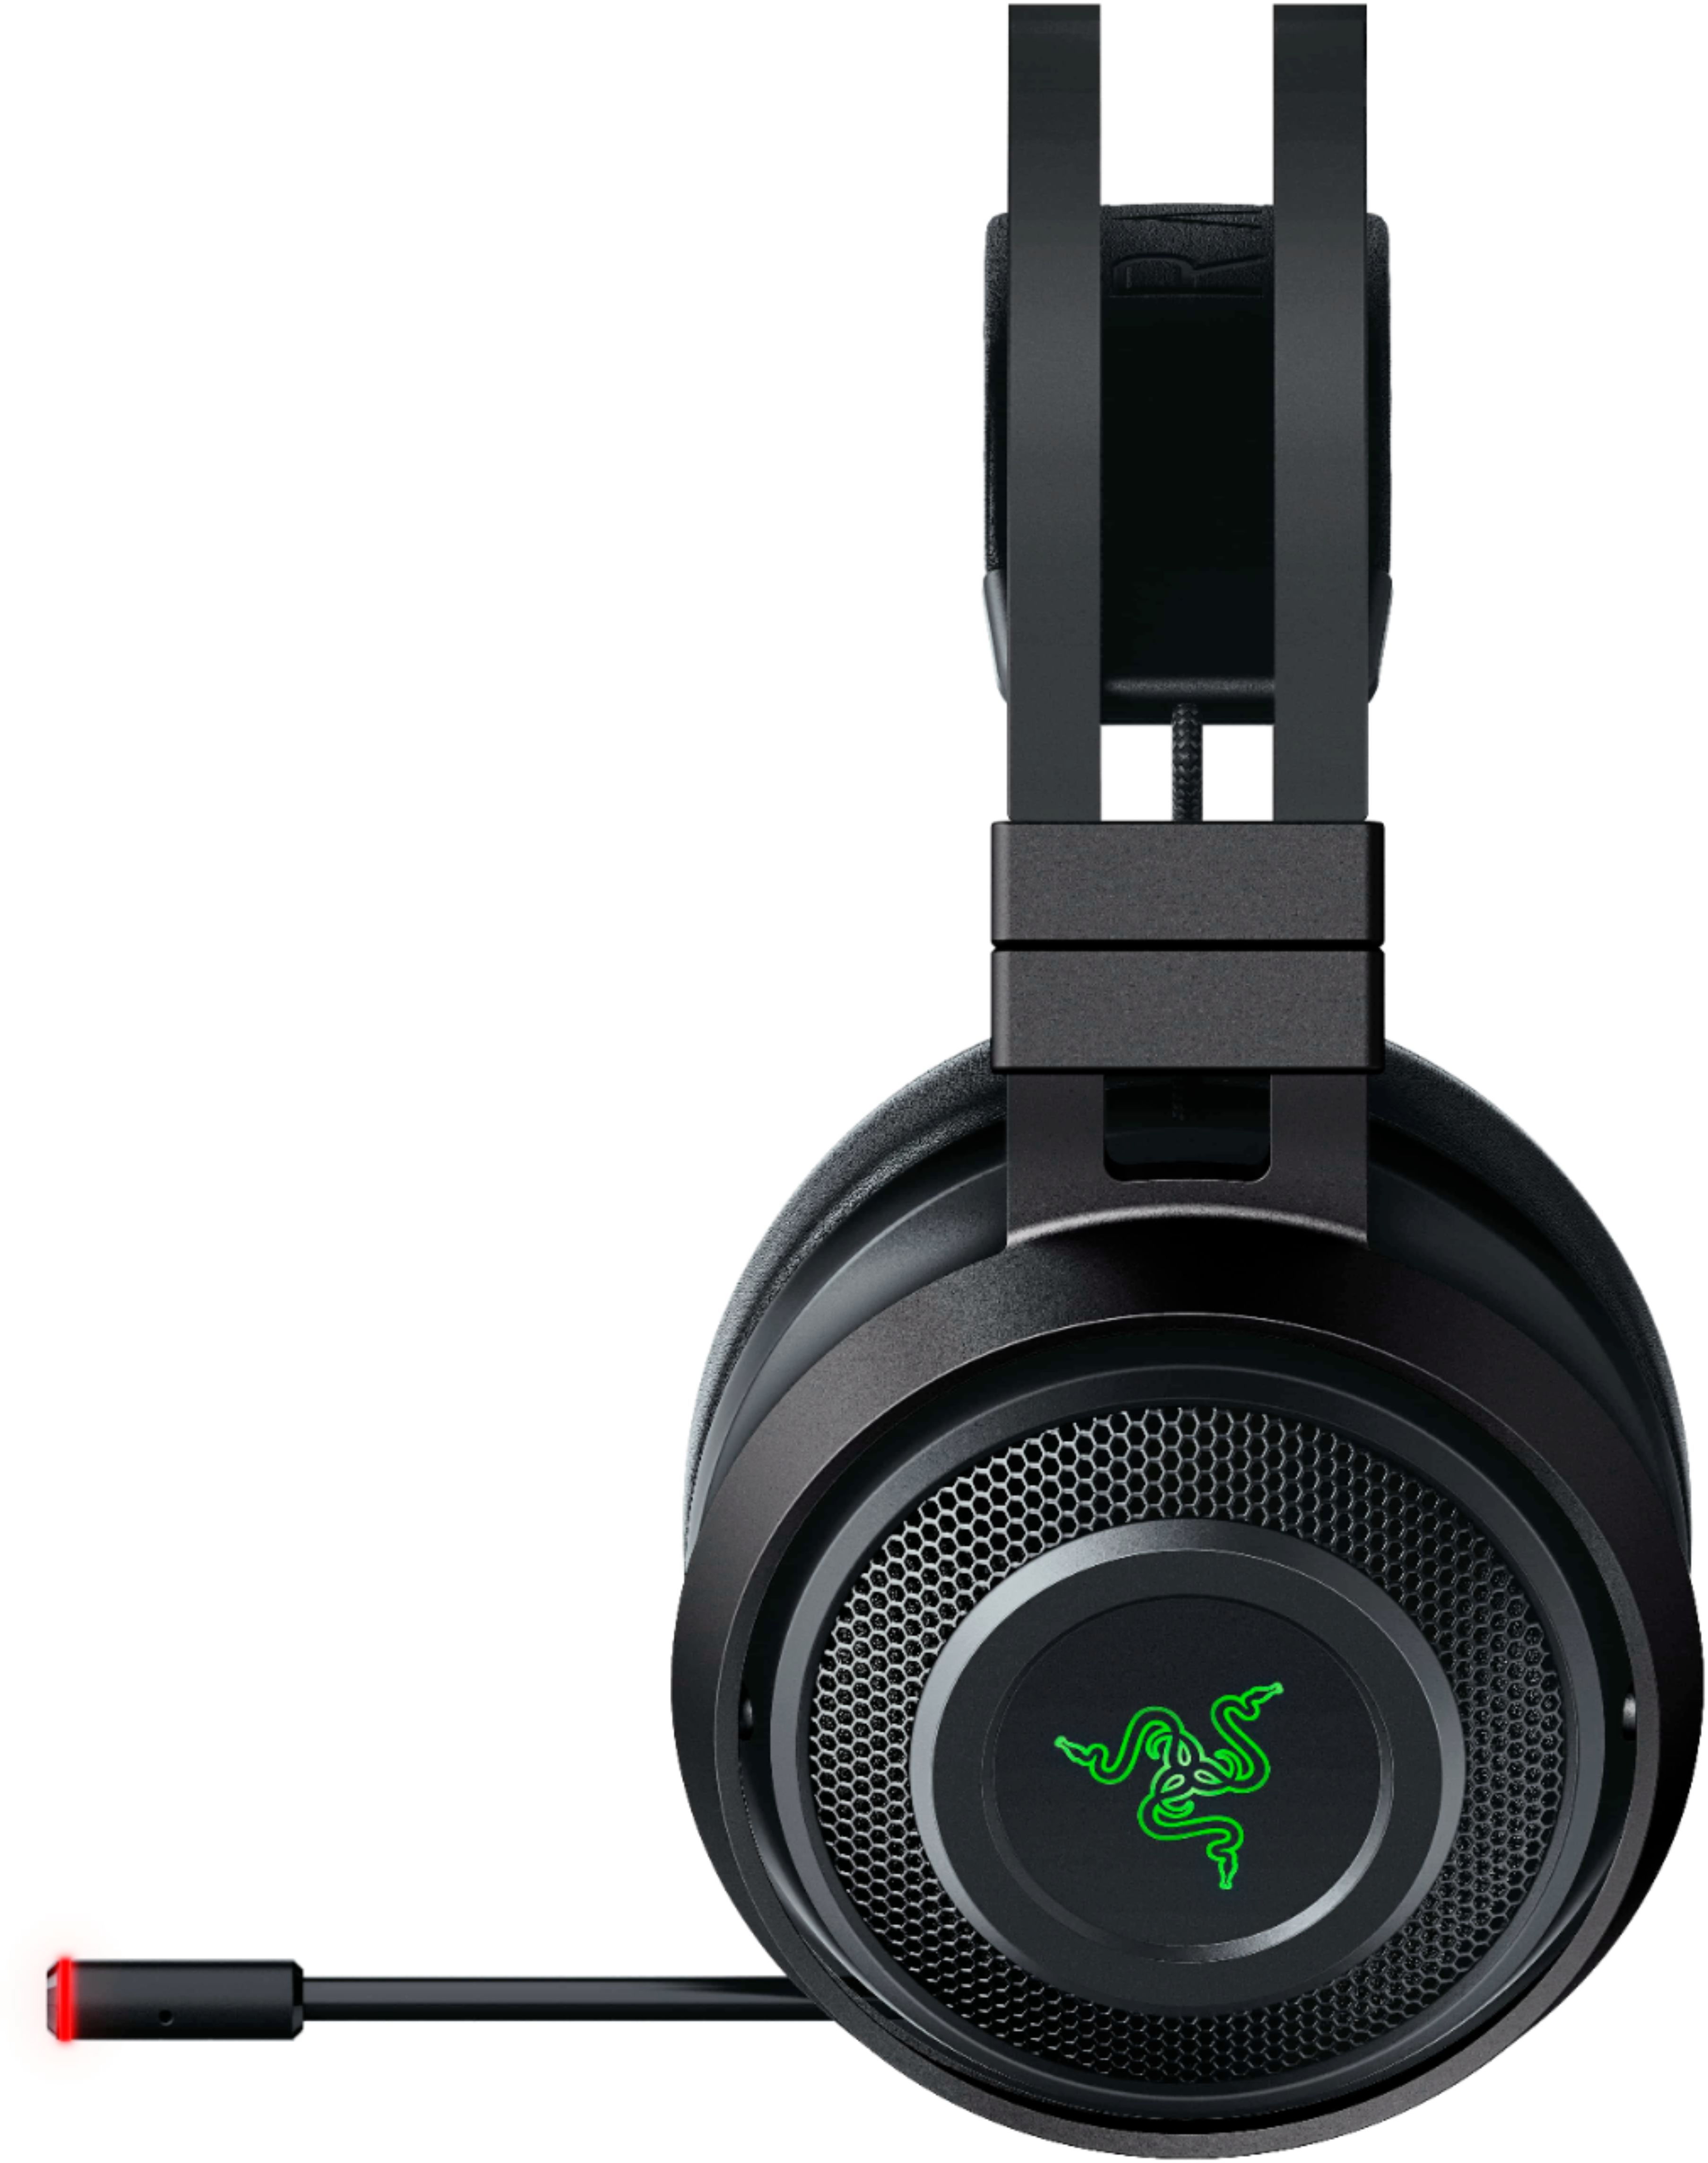 Razer Barracuda X wireless headset boosts games on the Switch, PS5, Android  - CNET